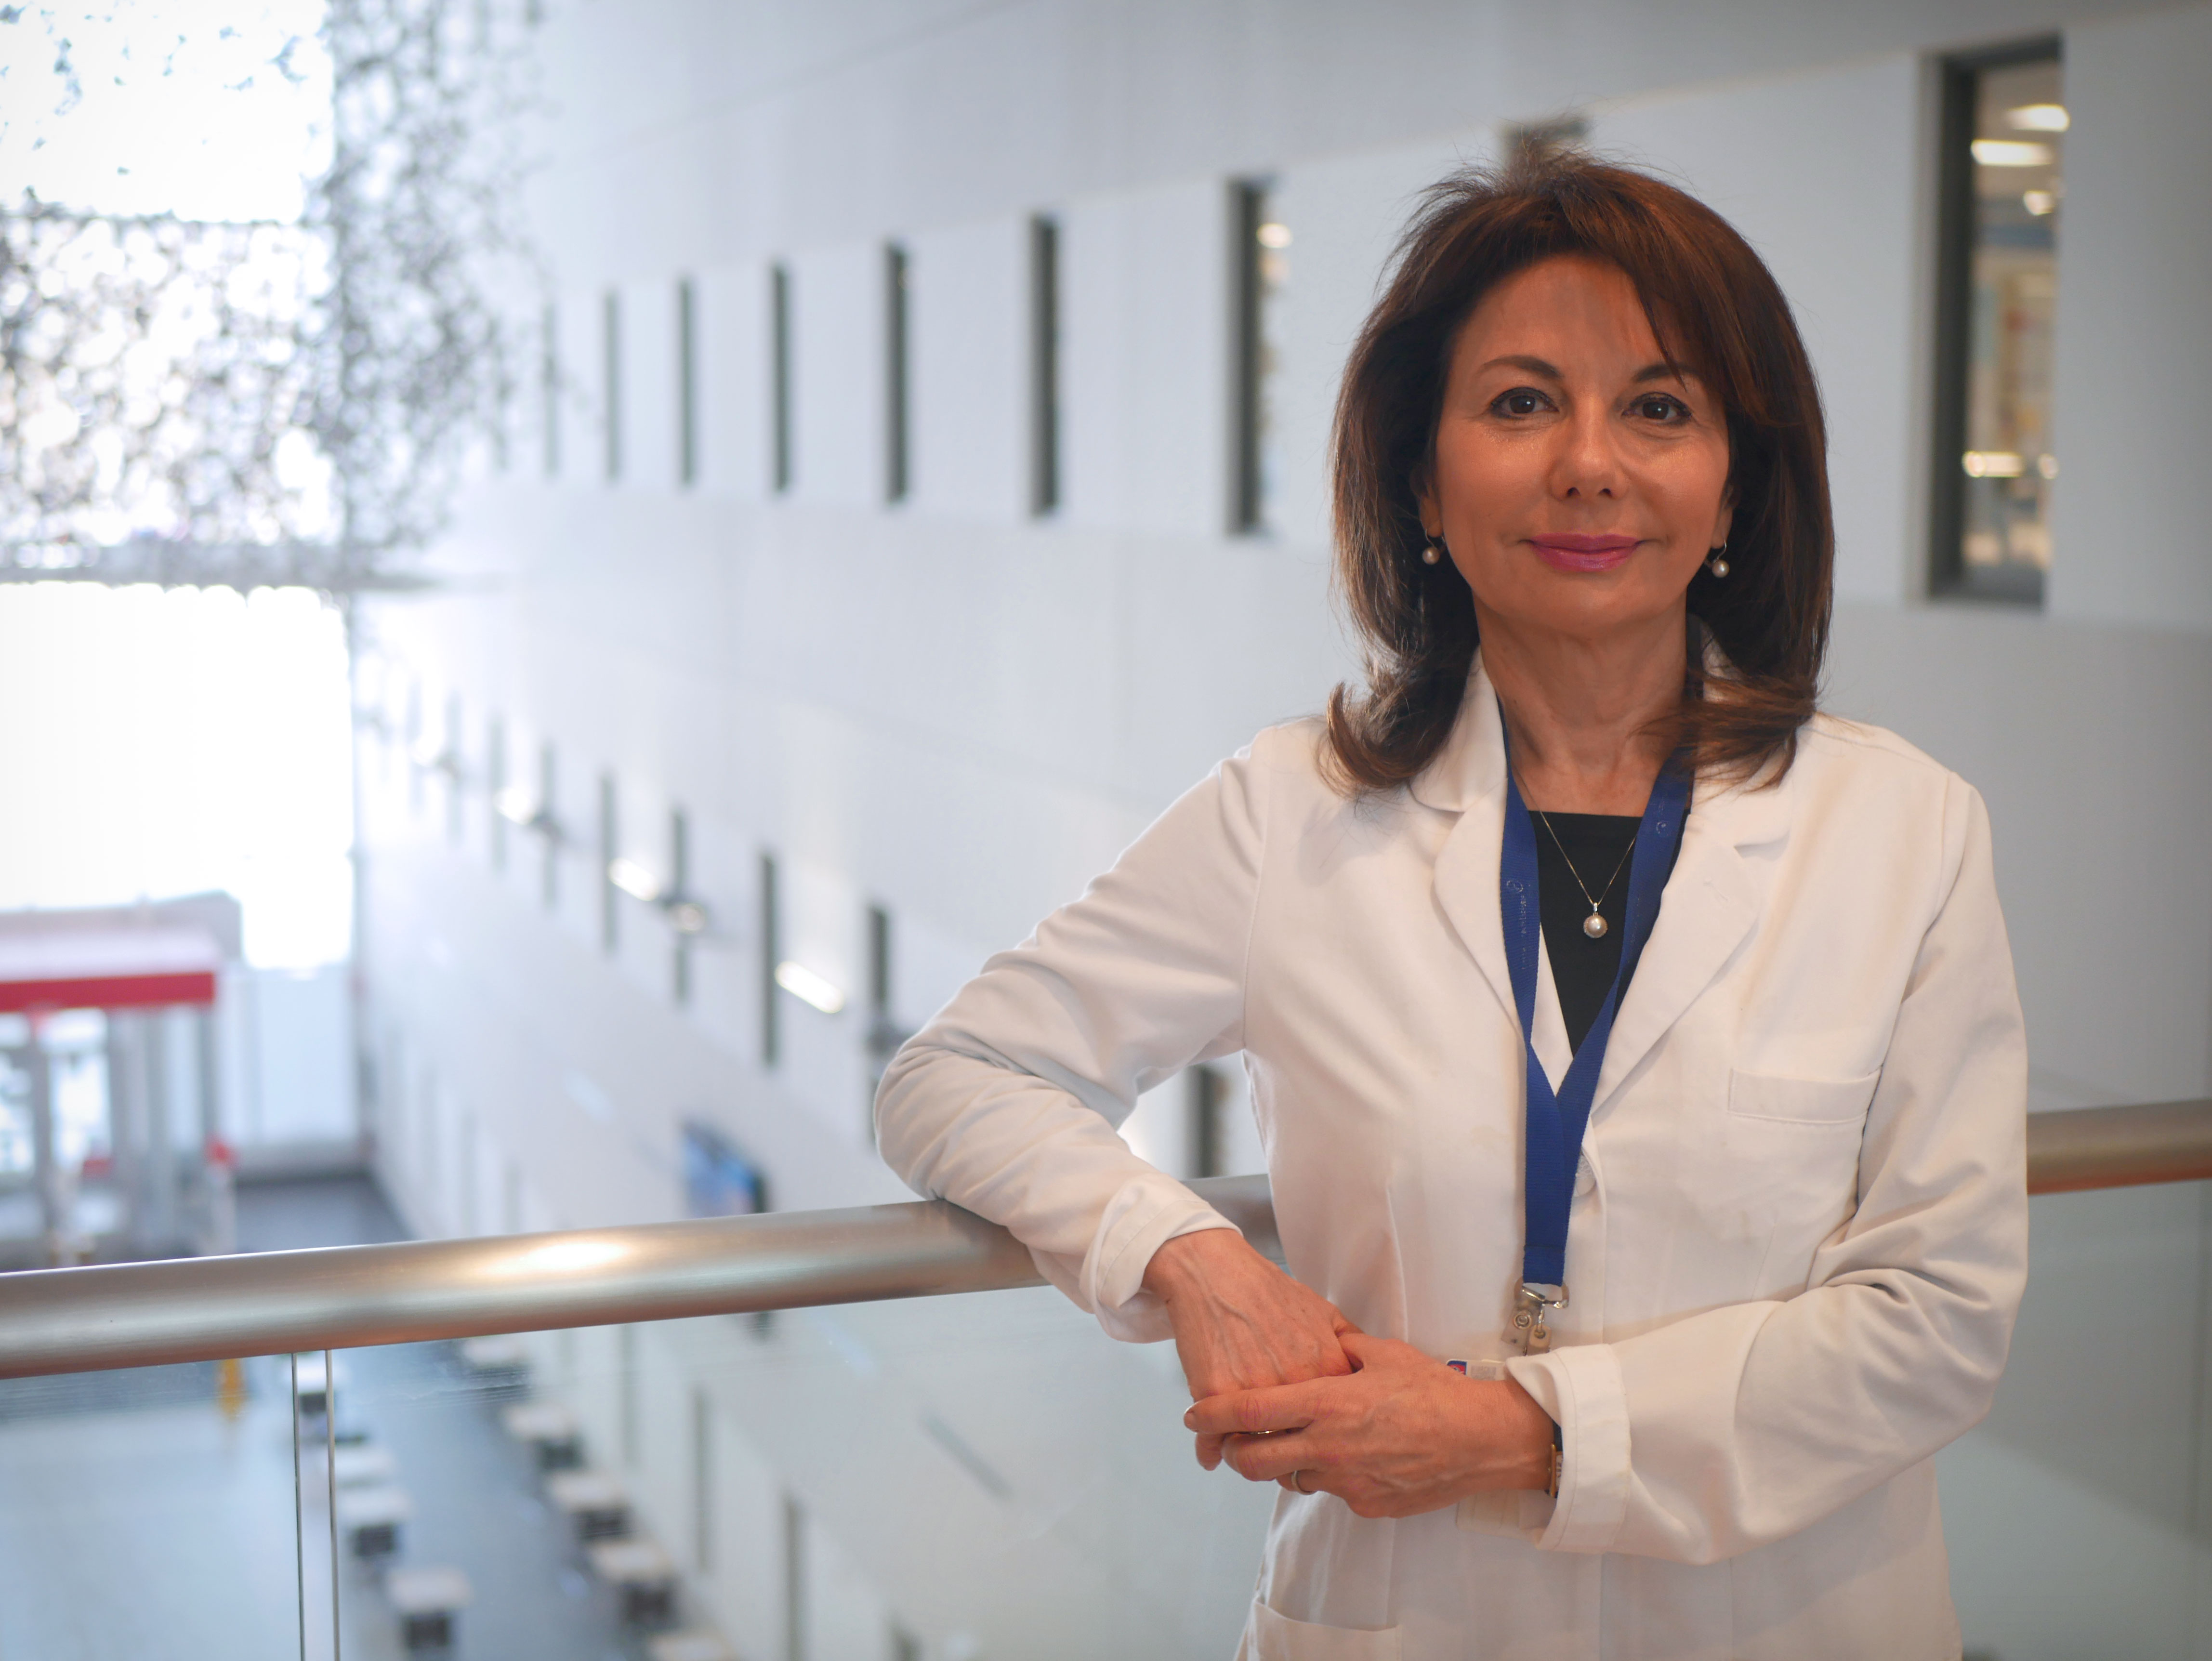 Dr. Gabriella Gobbi, senior scientist at the RI-MUHC, professor and head of the Neurobiological Psychiatry Unit in the Department of Psychiatry at McGill University.